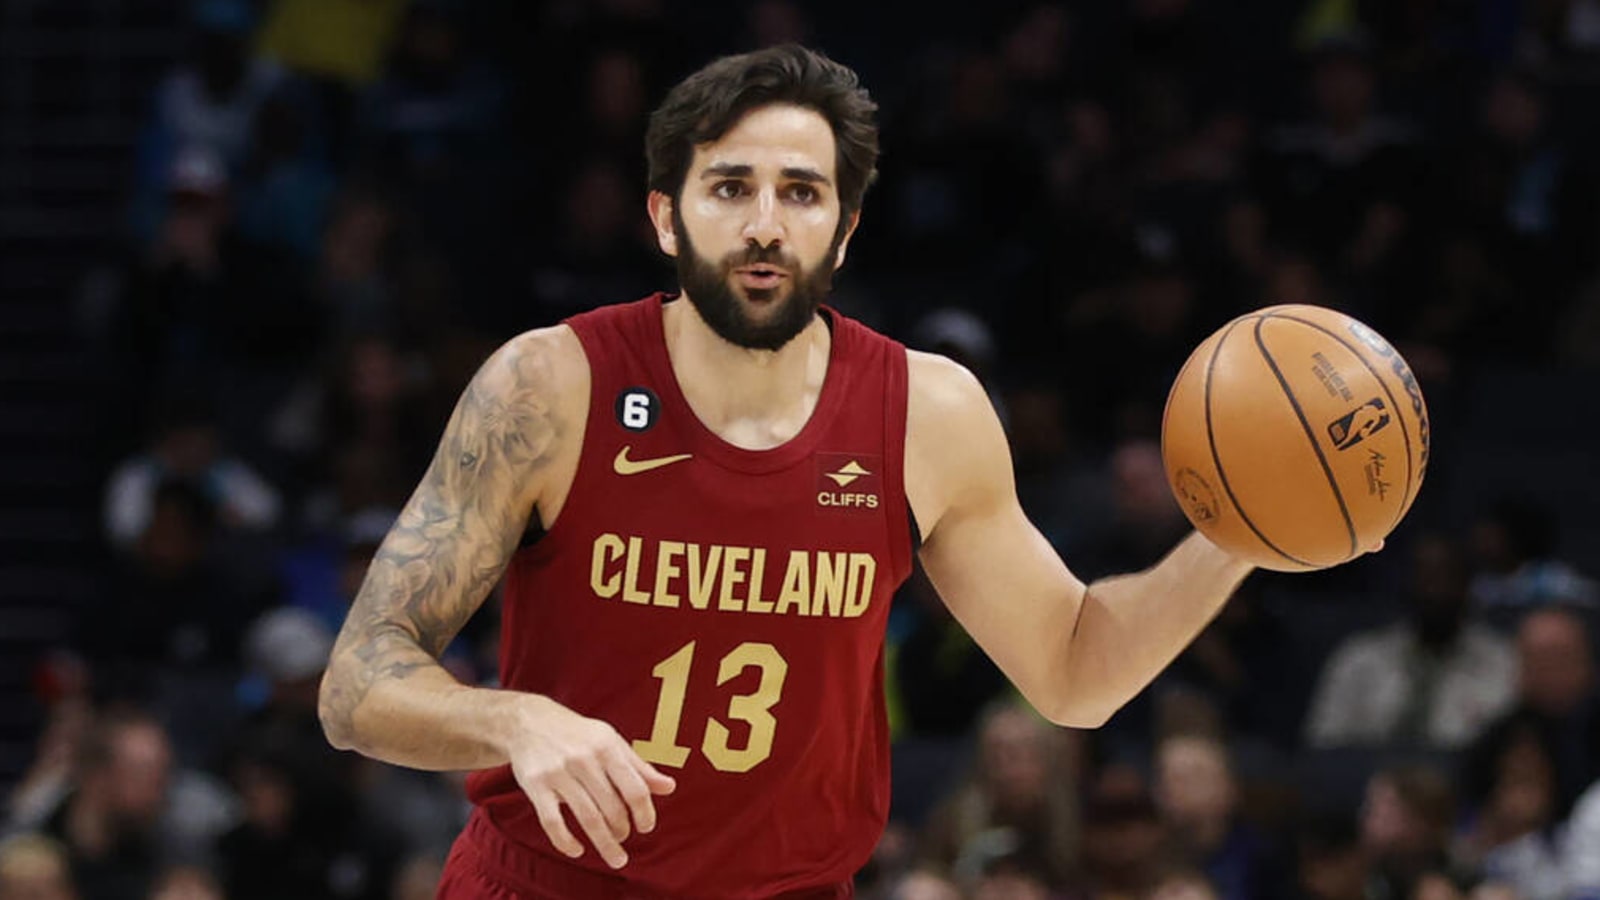 Ricky Rubio gave up millions of dollars in buyout agreement with Cavaliers